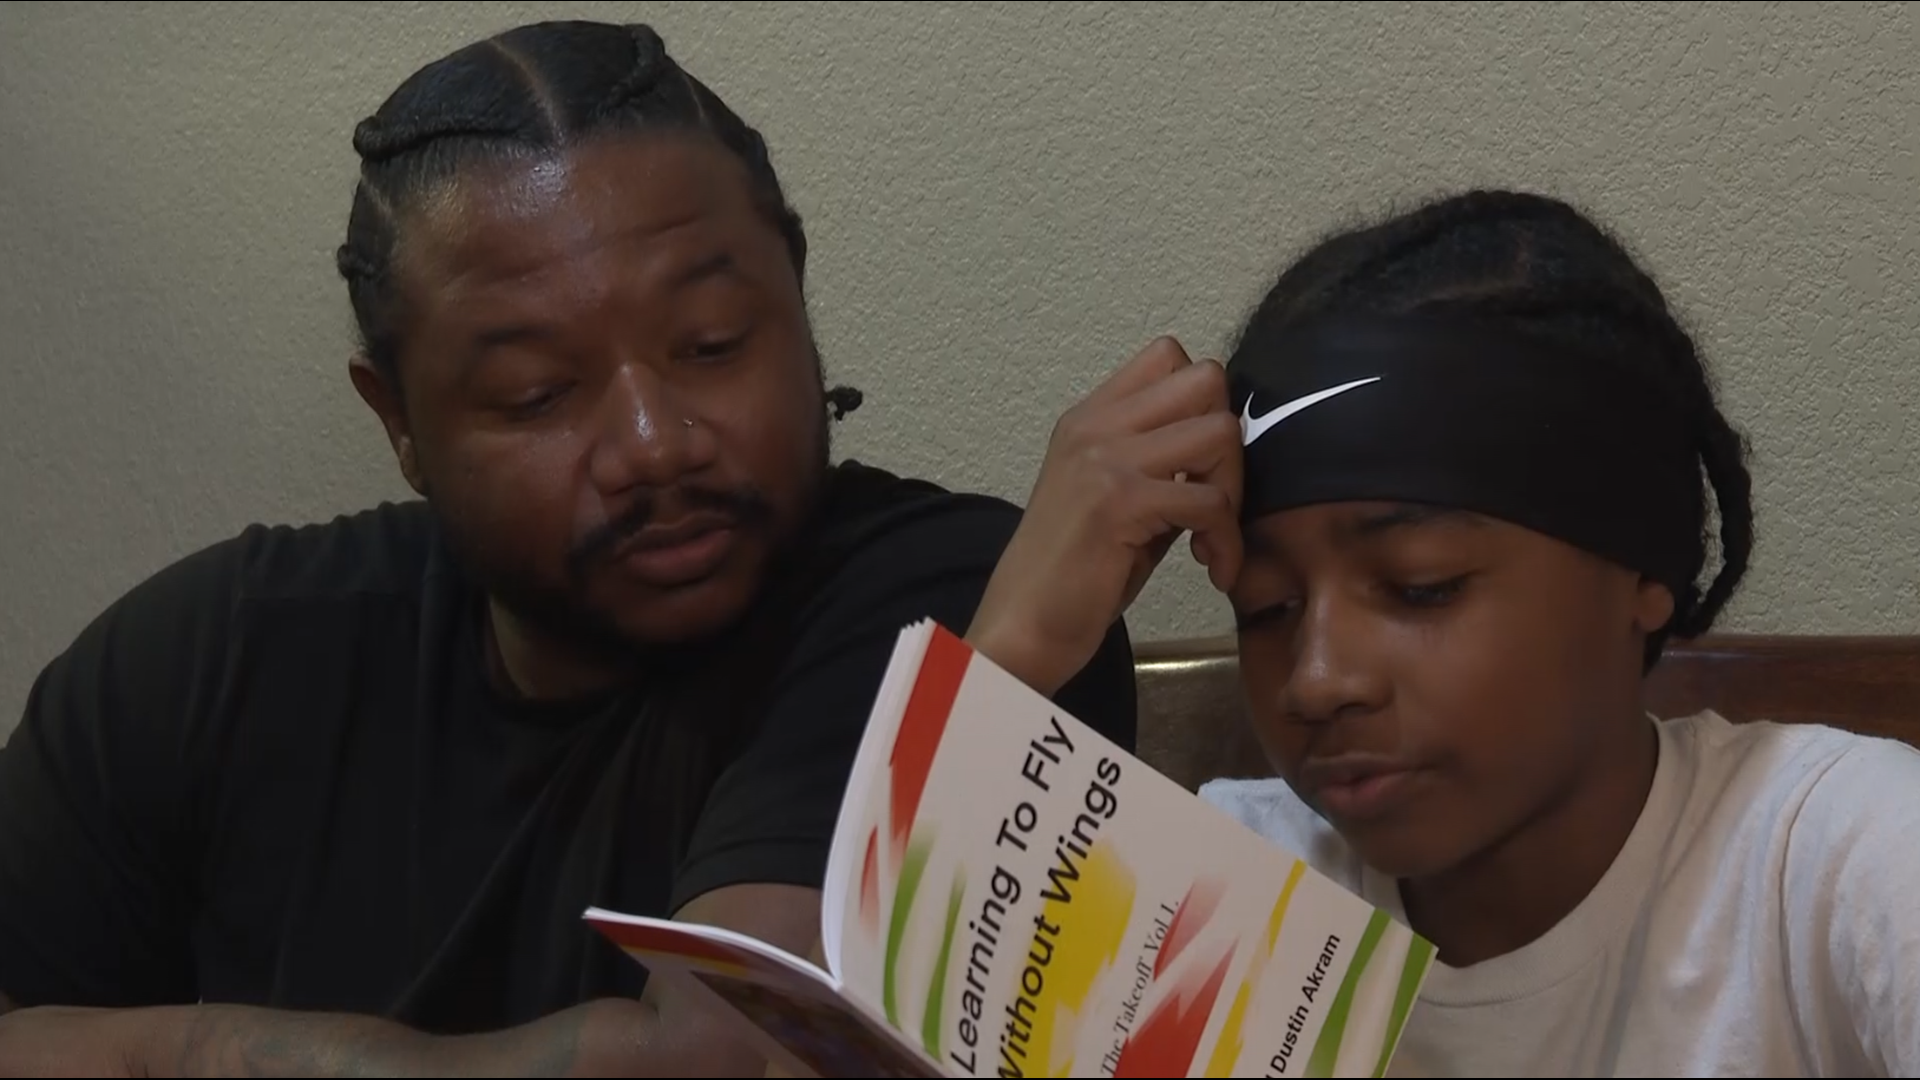 "Learning to Fly Without Wings" is a self-help book for kids written by a Temple father and son who want to help young minds get through rough times.